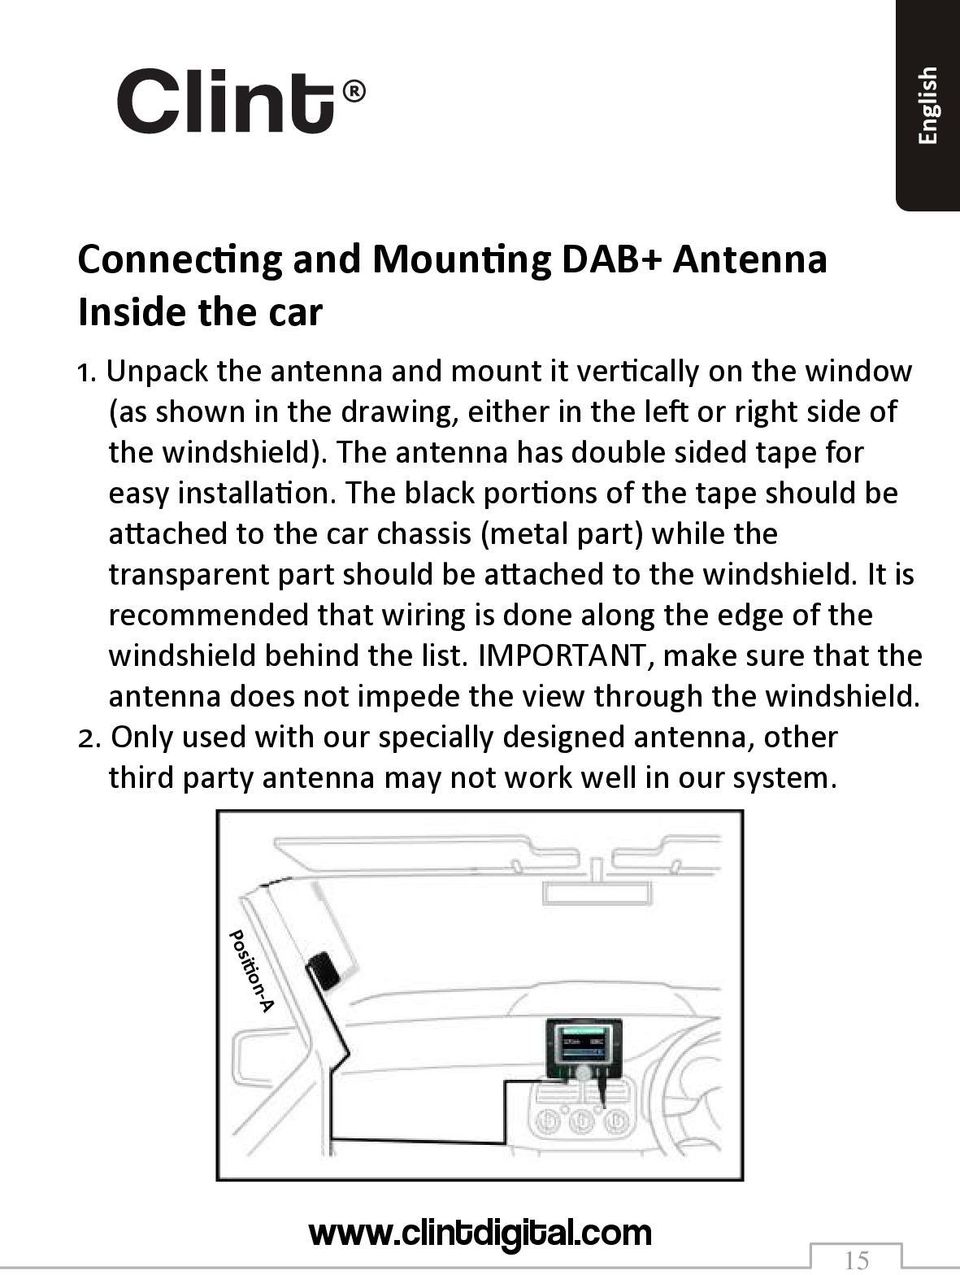 The antenna has double sided tape for easy installation.